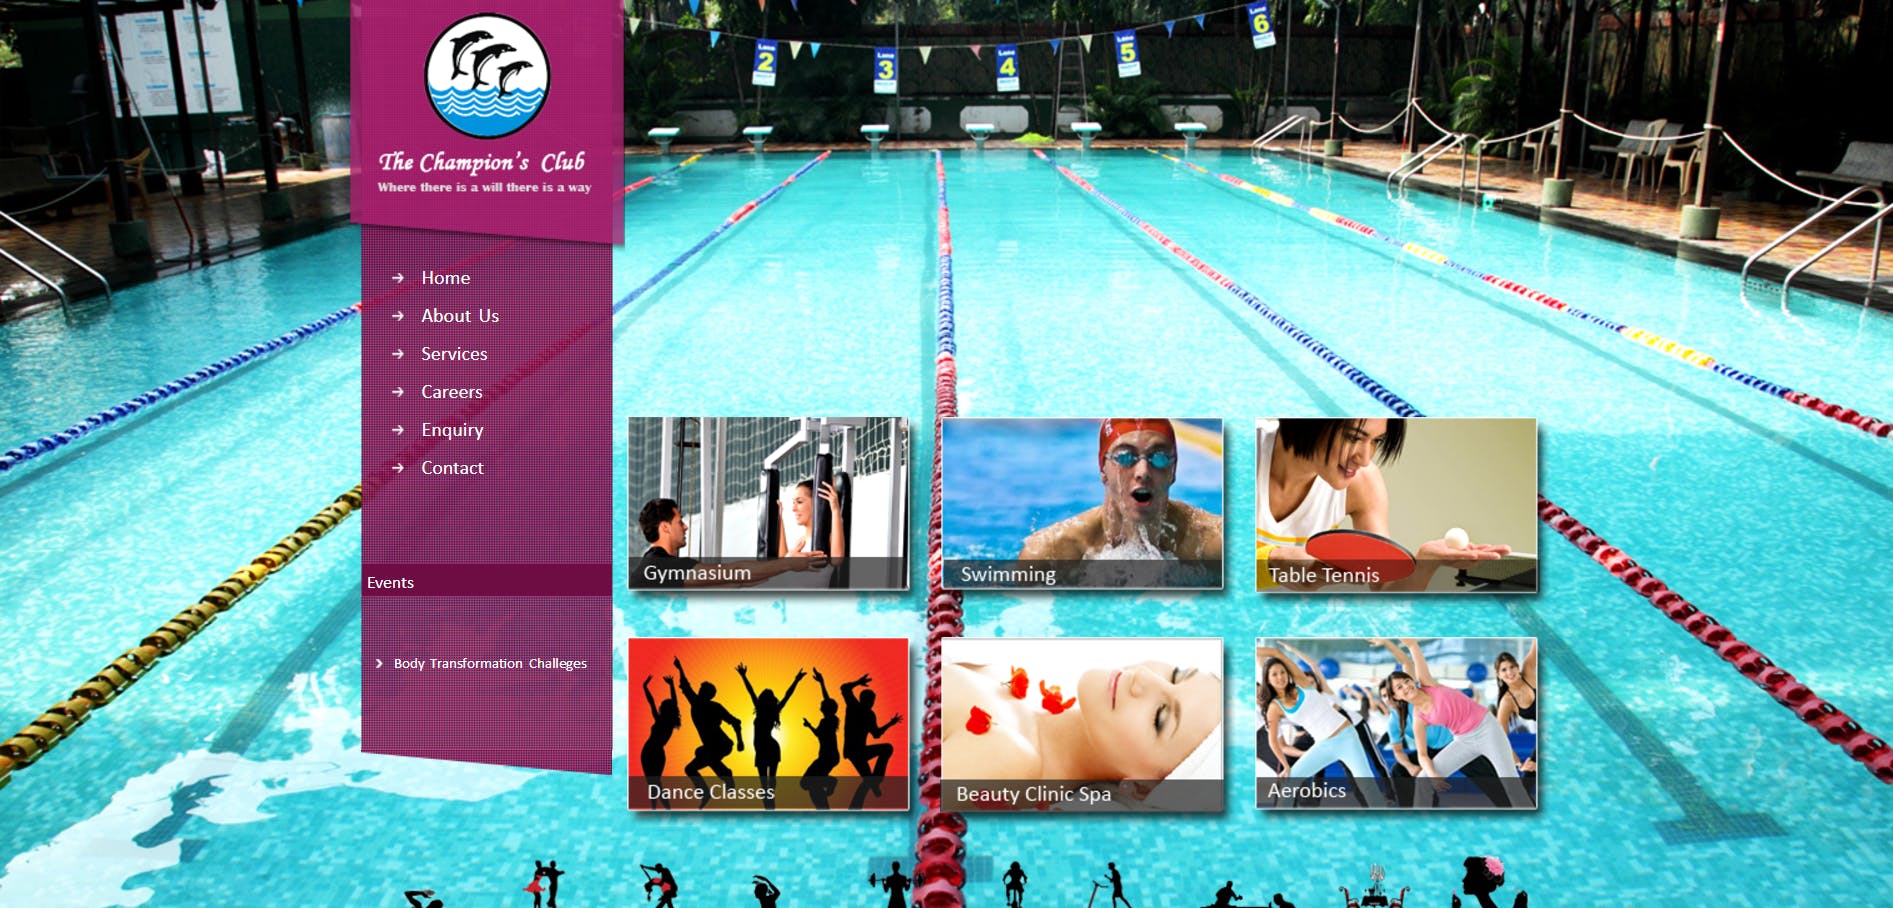 Swimming,Leisure centre,Swimming pool,Leisure,Recreation,Swimmer,Individual sports,Fun,Sports,Water sport